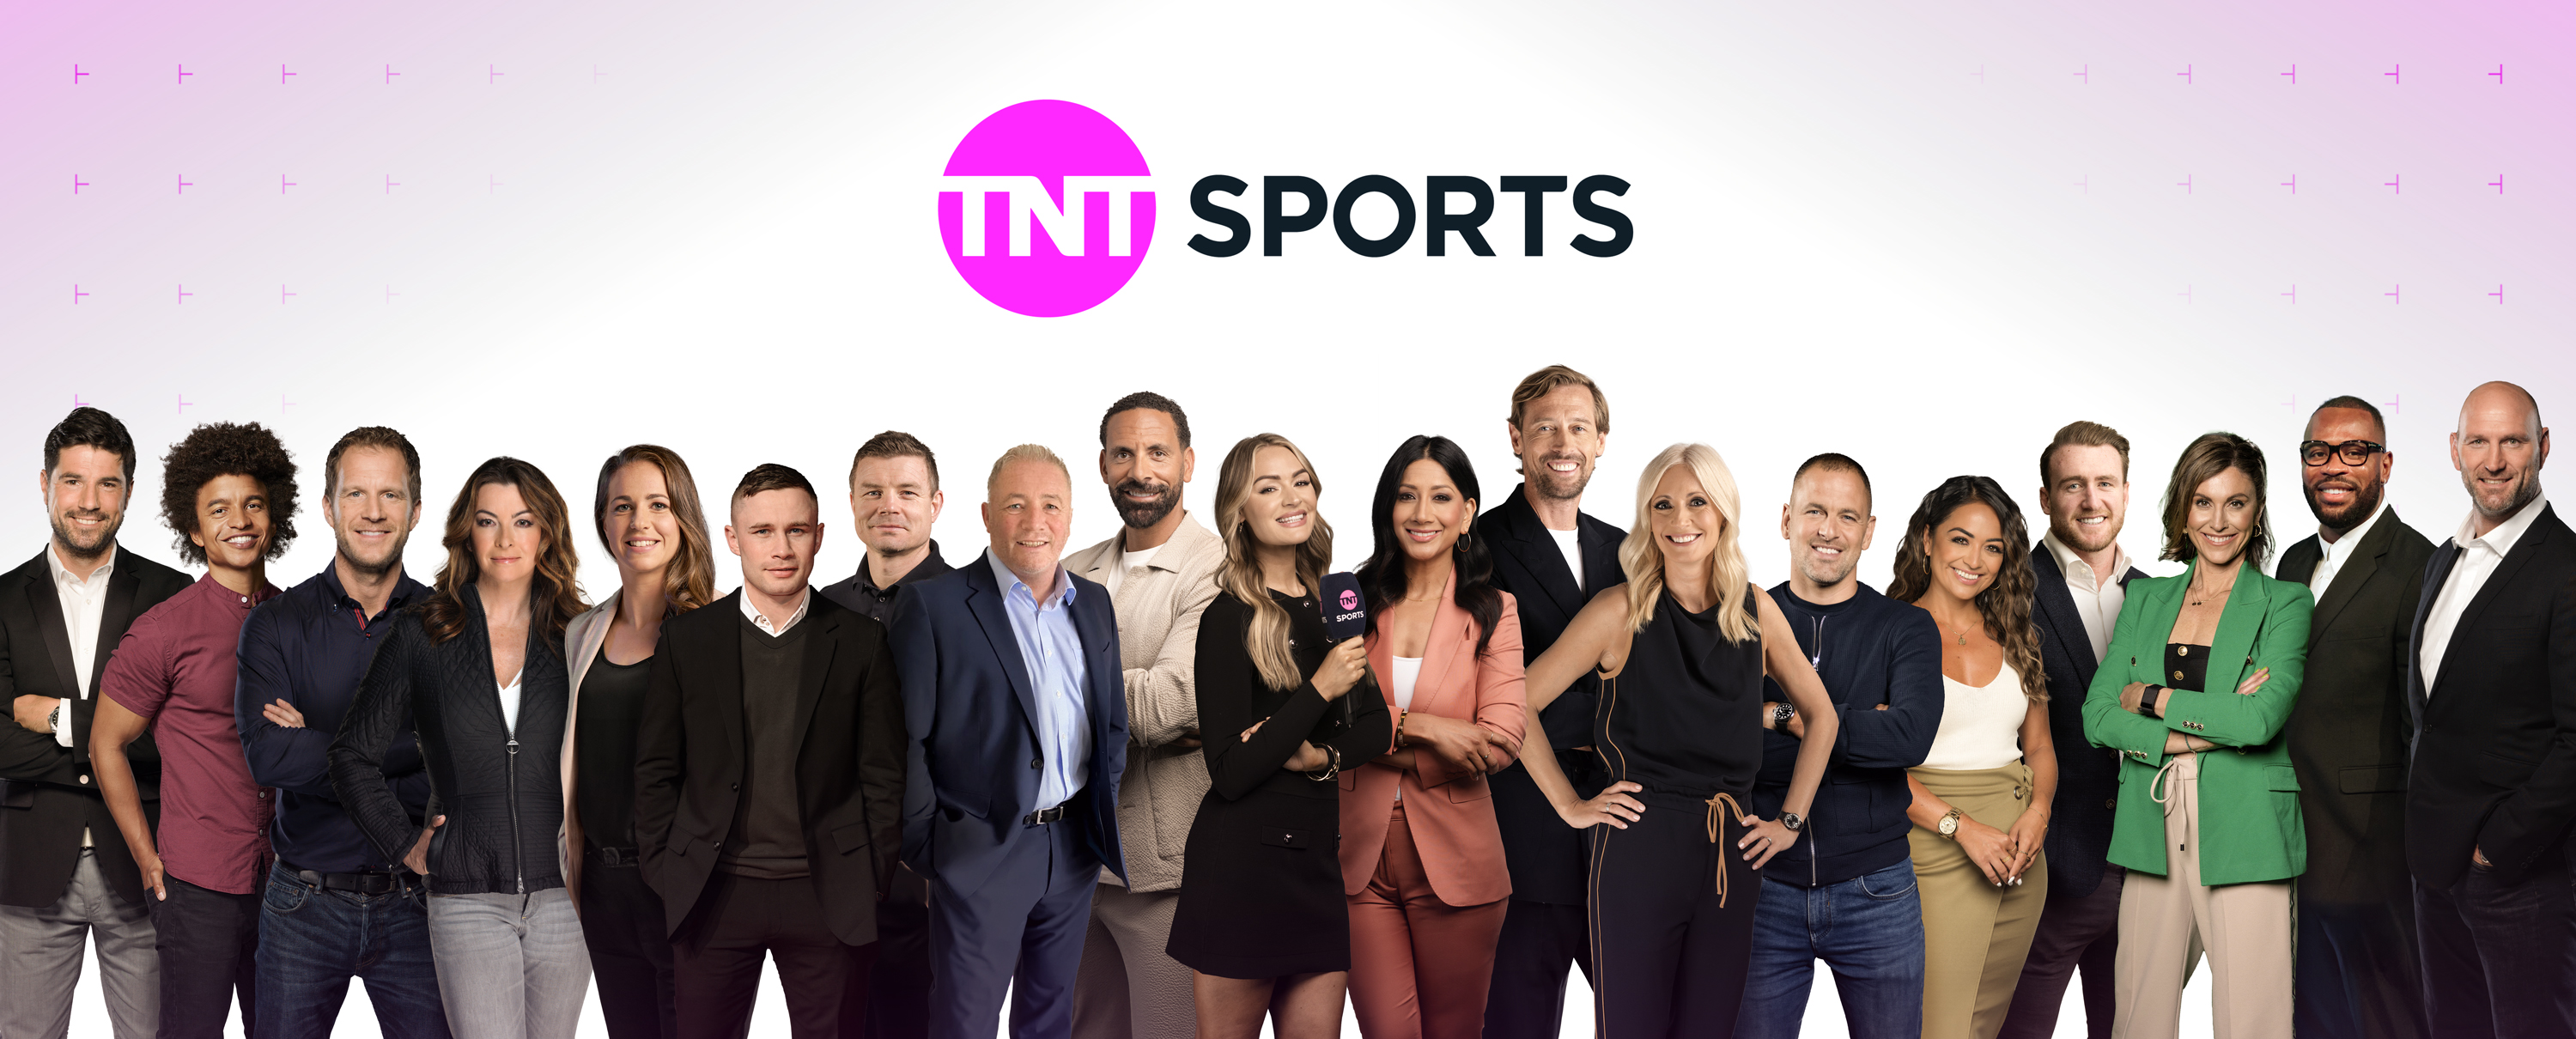 TNT Sports and Eurosport have a 19-strong core presenting team